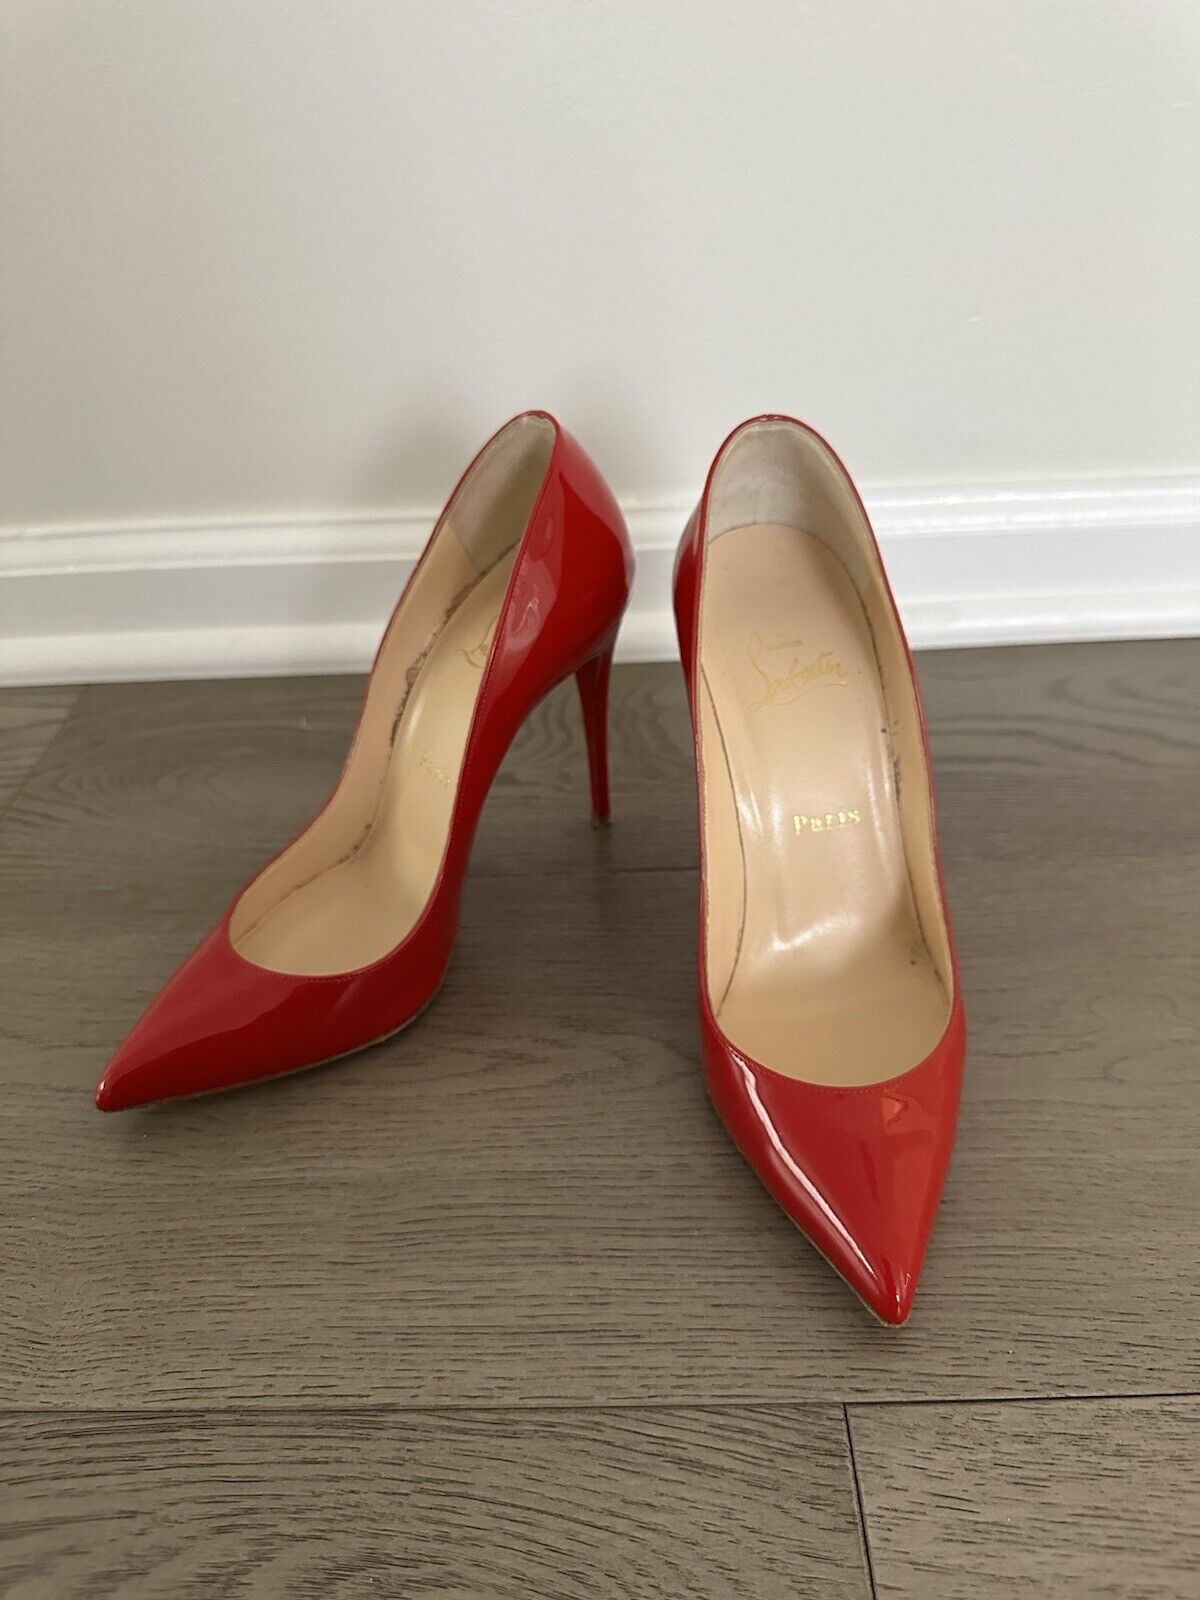 CHRISTIAN LOUBOUTIN PIGALLE RED PATENT LEATHER 10… - image 4